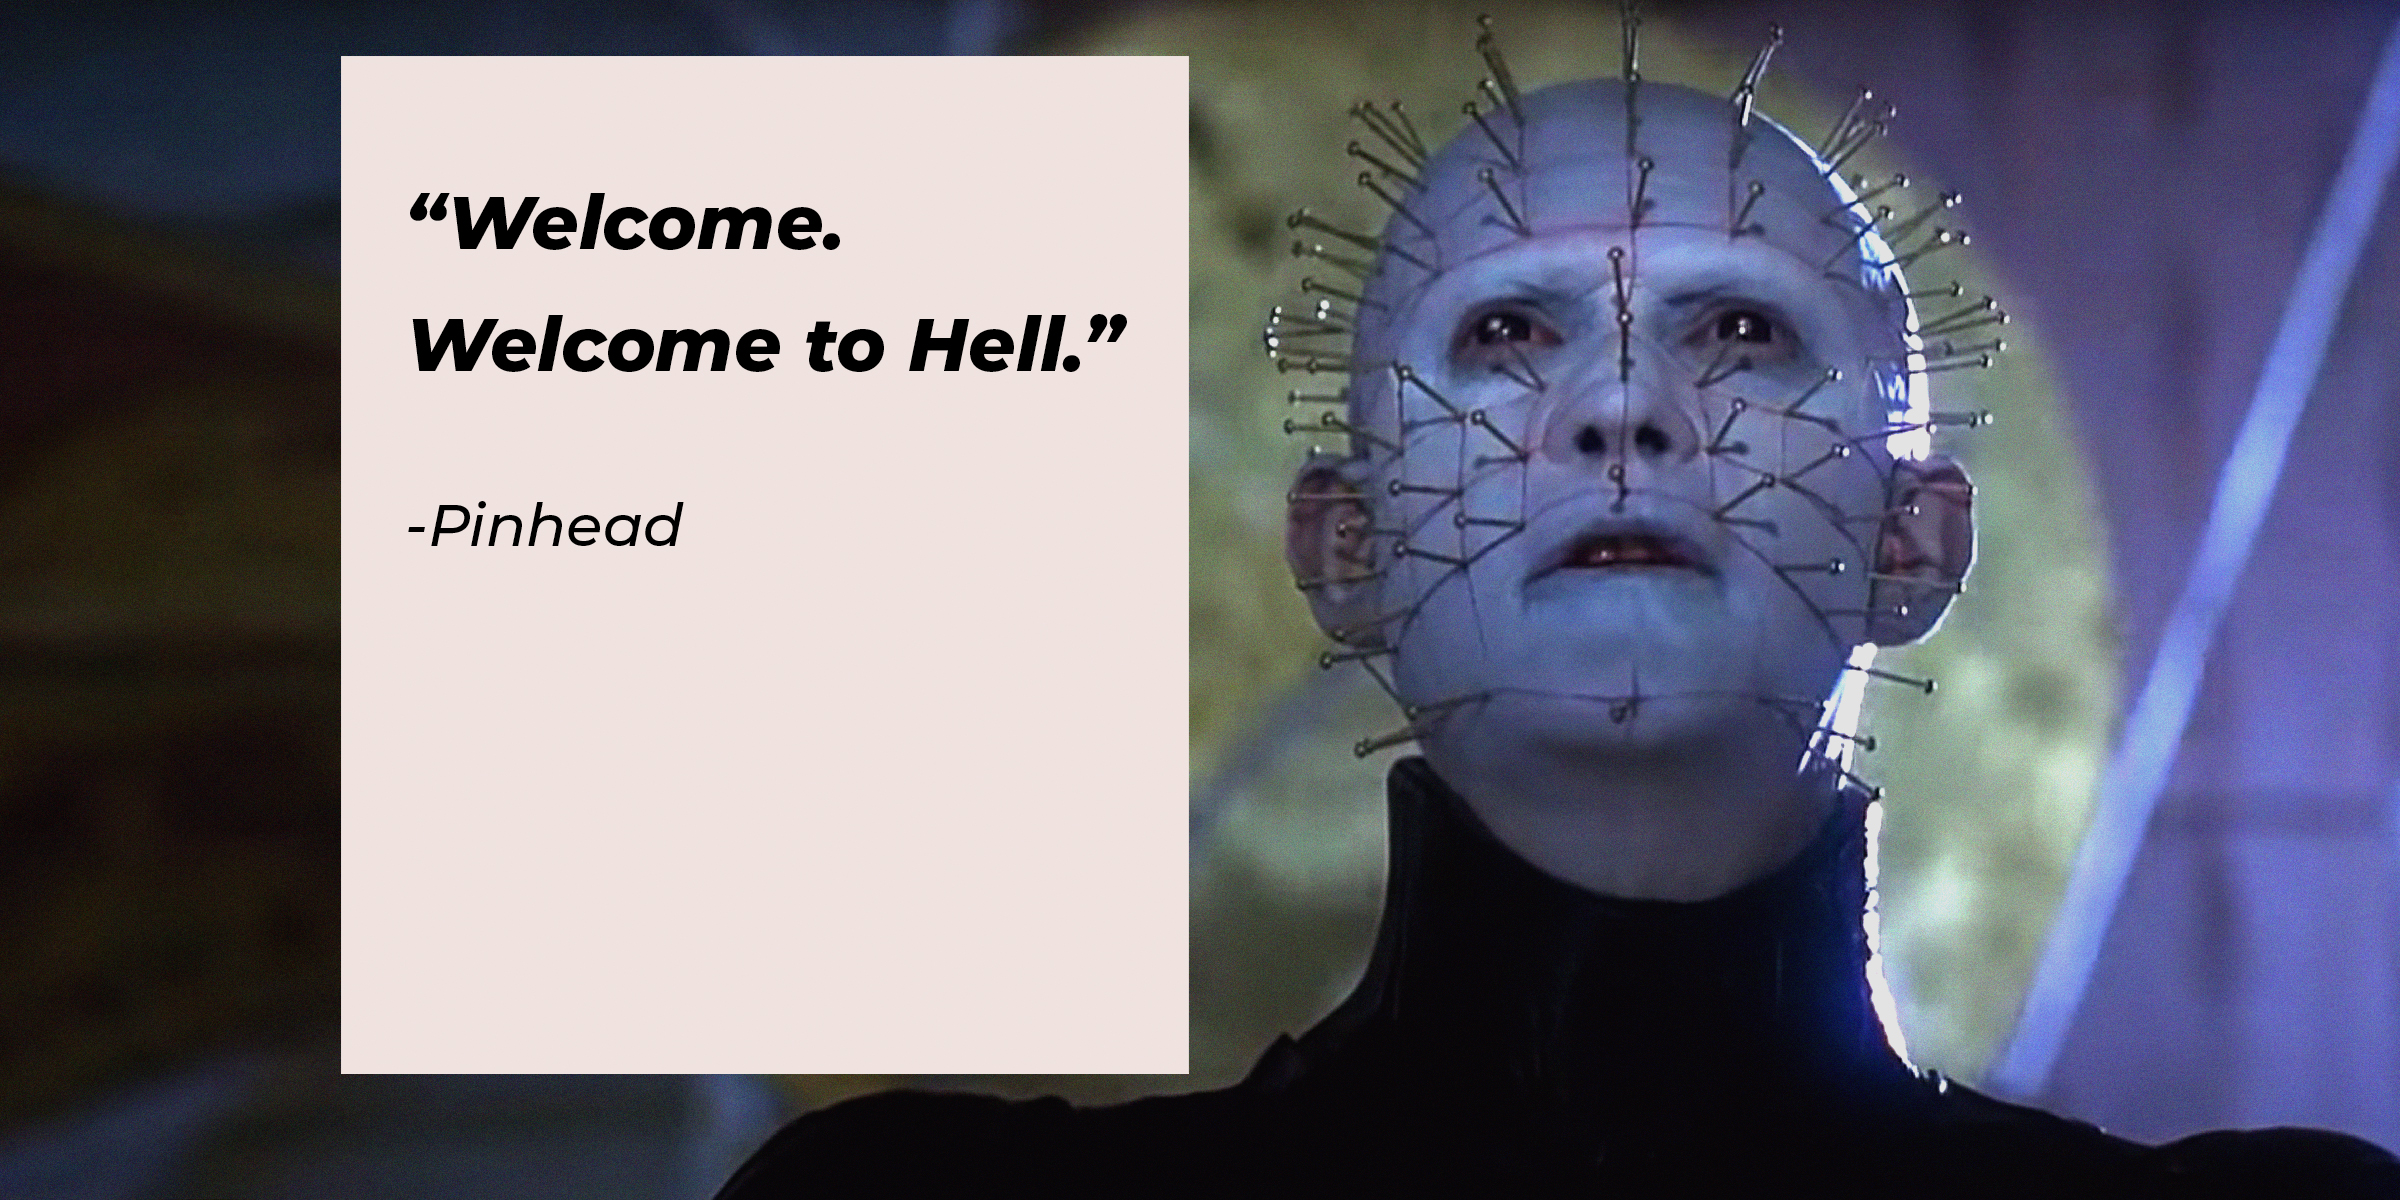 Pinhead's quote from "Hellraiser:" "Welcome. Welcome to Hell." | Source: facebook.com/HellraiserMovies